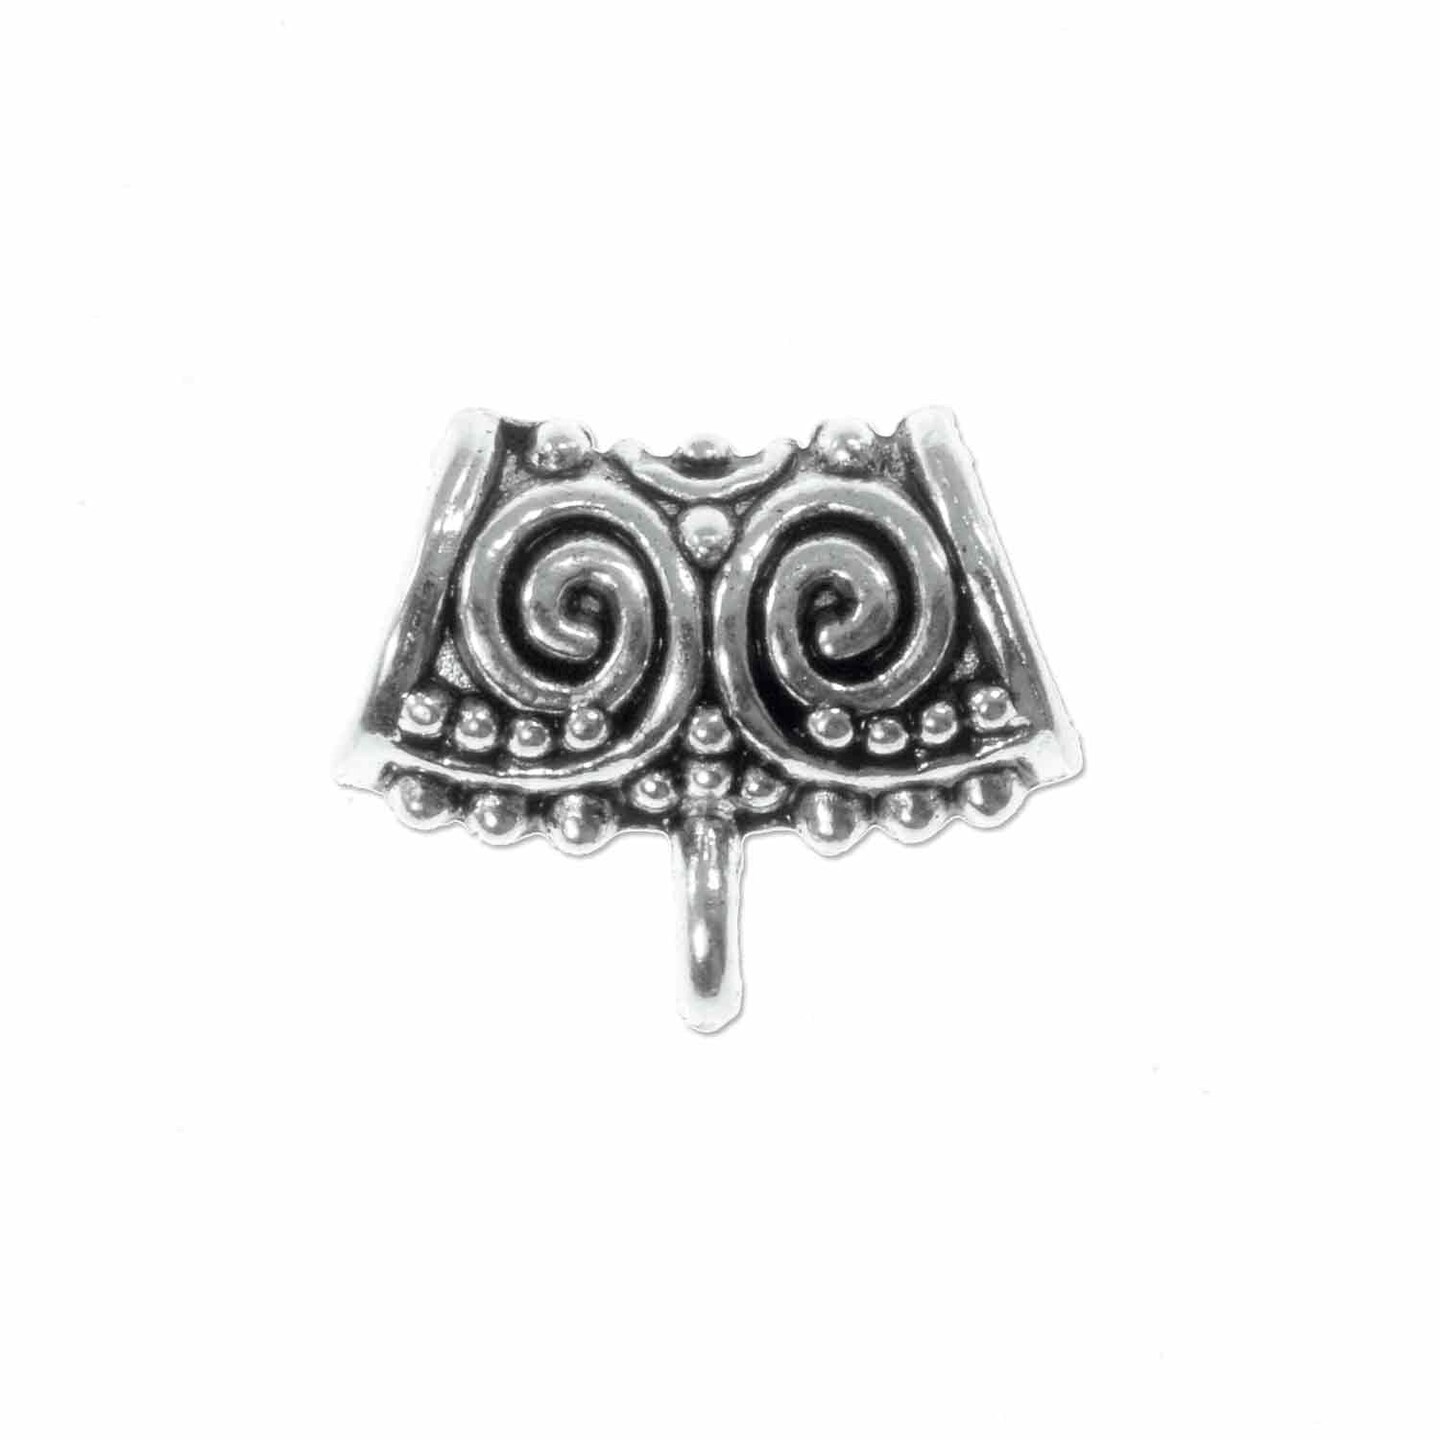 Scrollwork Bail 17x20mm Pewter Antique Silver Plated (1-Piece)